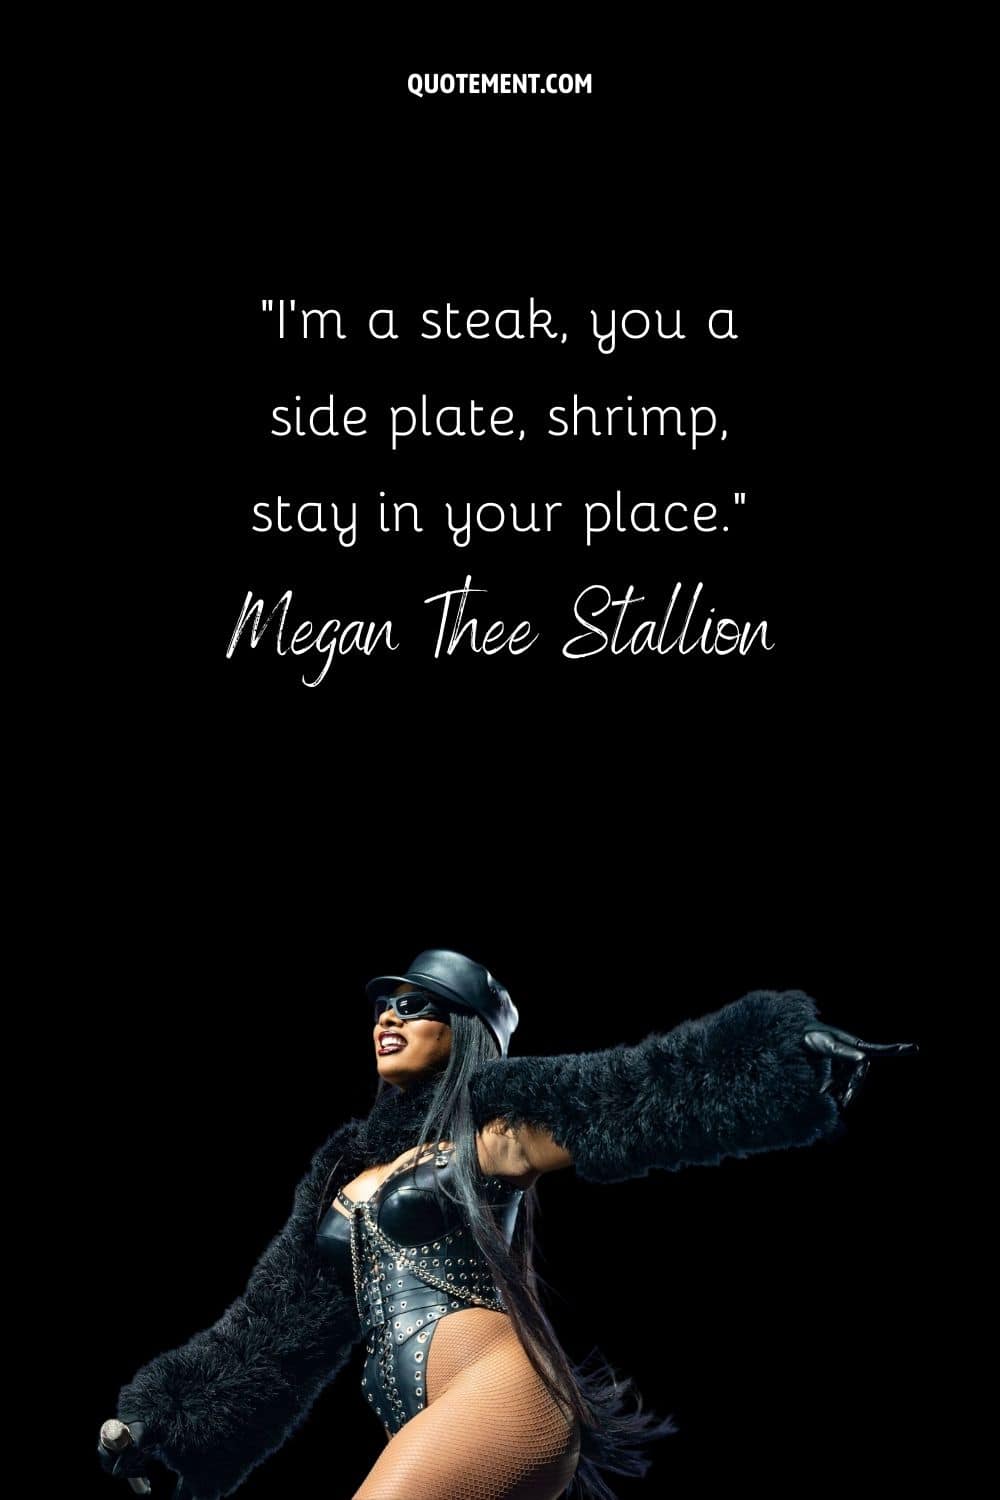 “I'm a steak, you a side plate, shrimp, stay in your place.” — Megan Thee Stallion